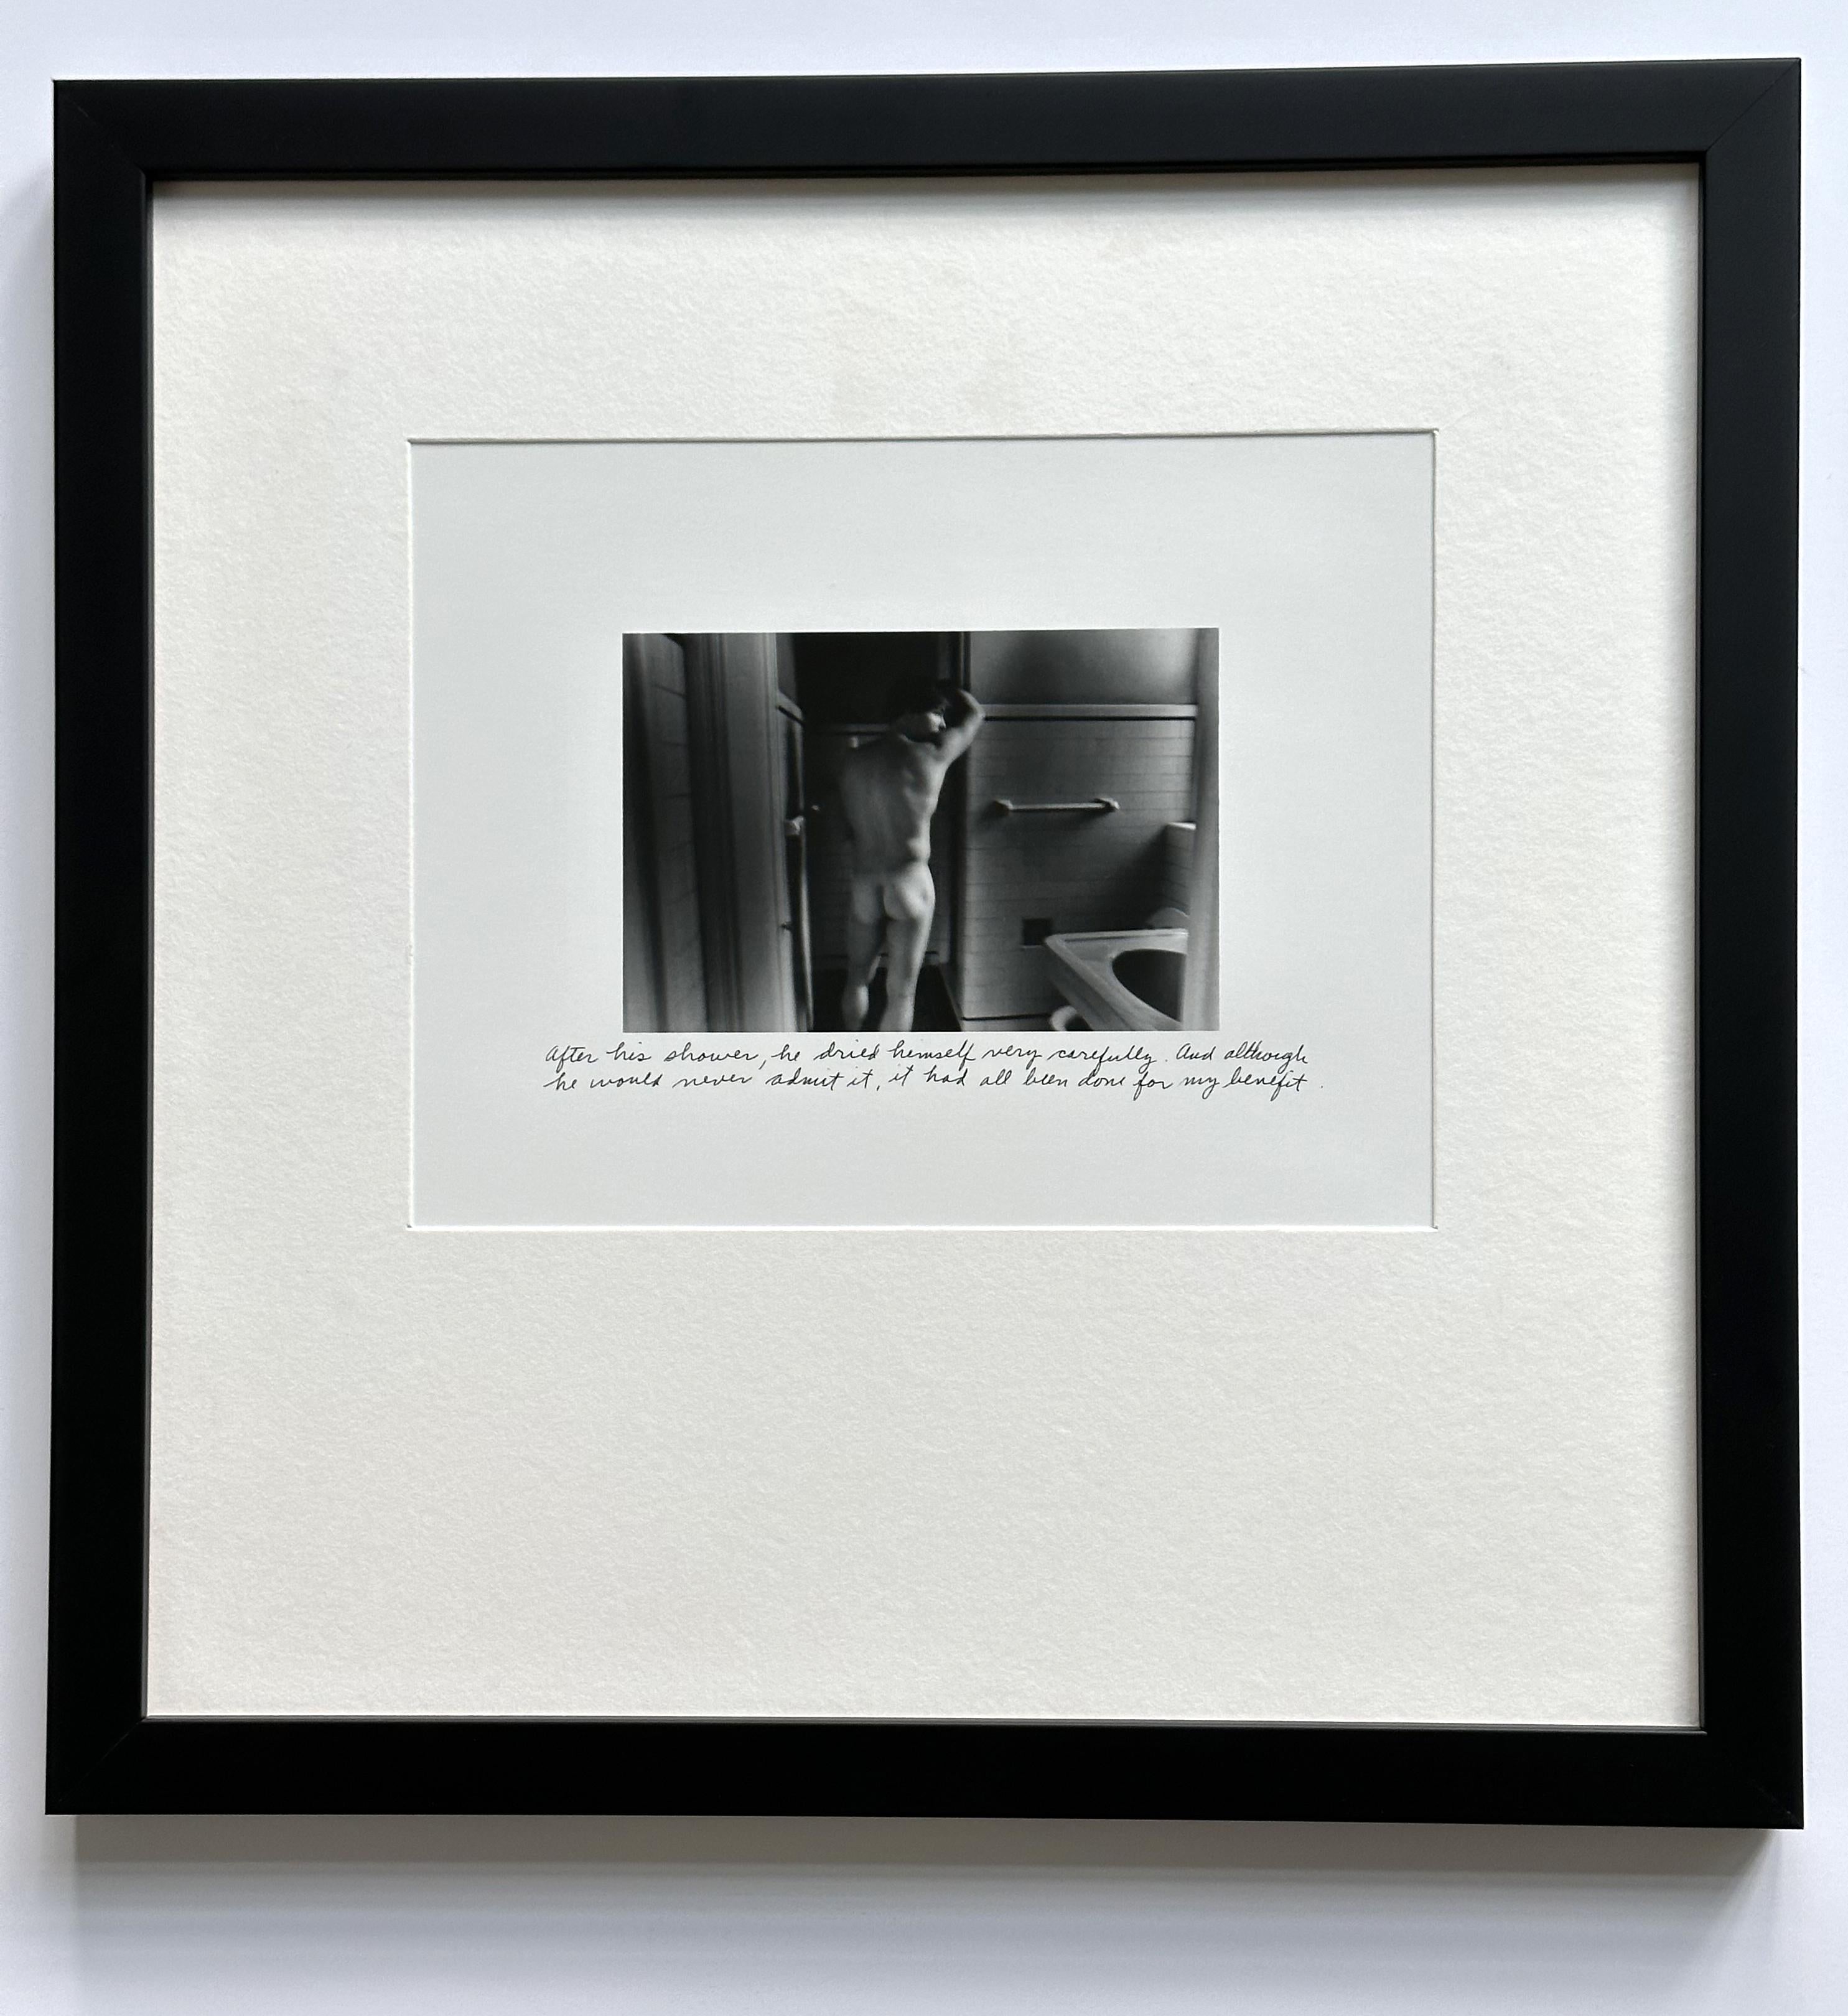 An editioned gelatin silver print by American photographer Duane Michals (1932-). 